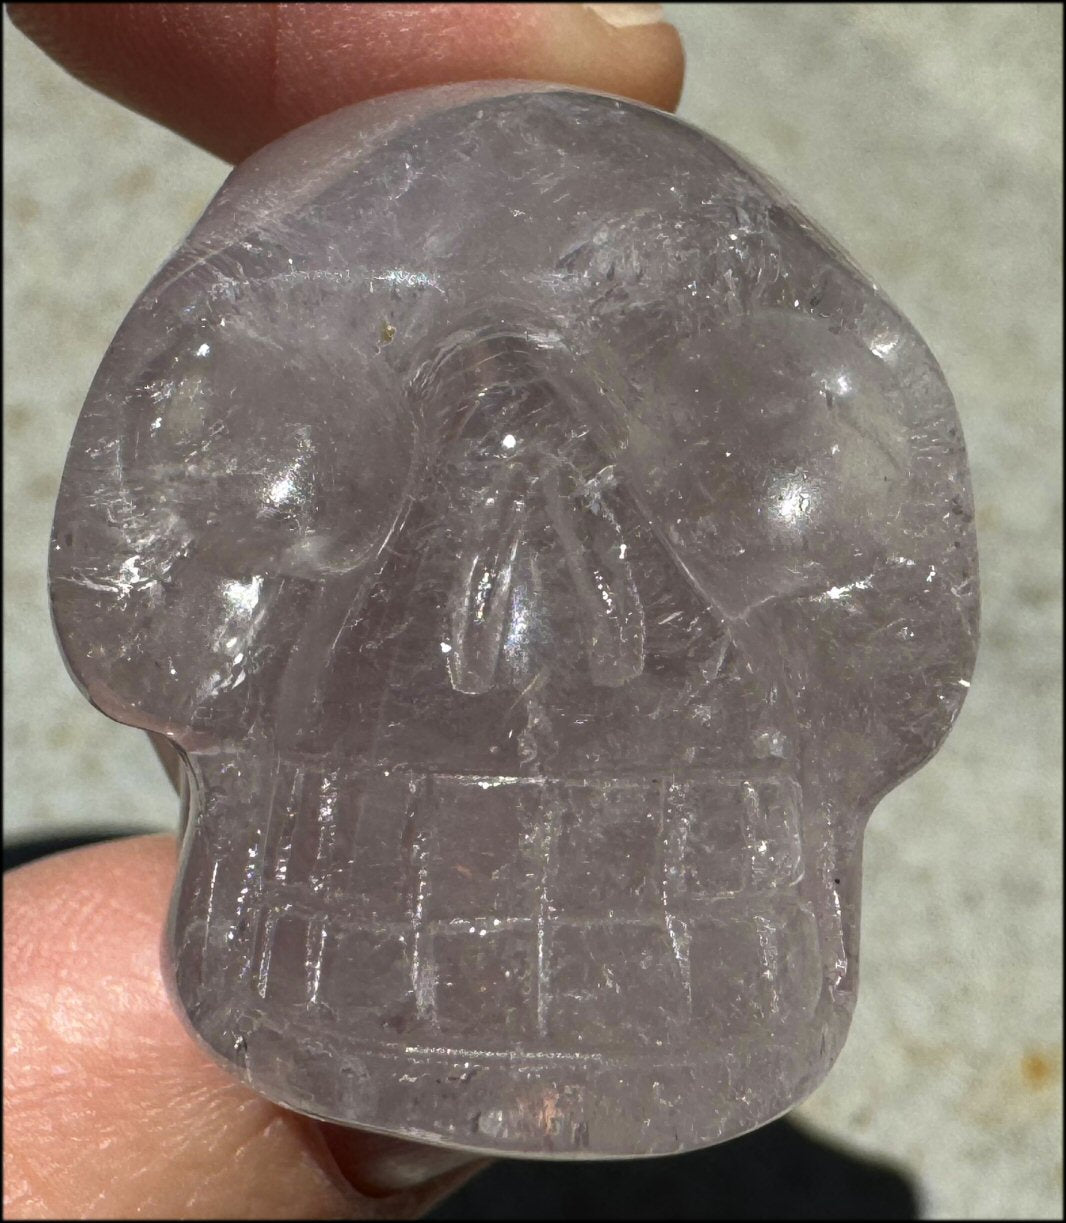 Small AMETHYST Crystal Skull with Rainbows - Inner Peace, Divination - with Synergy 10+ years